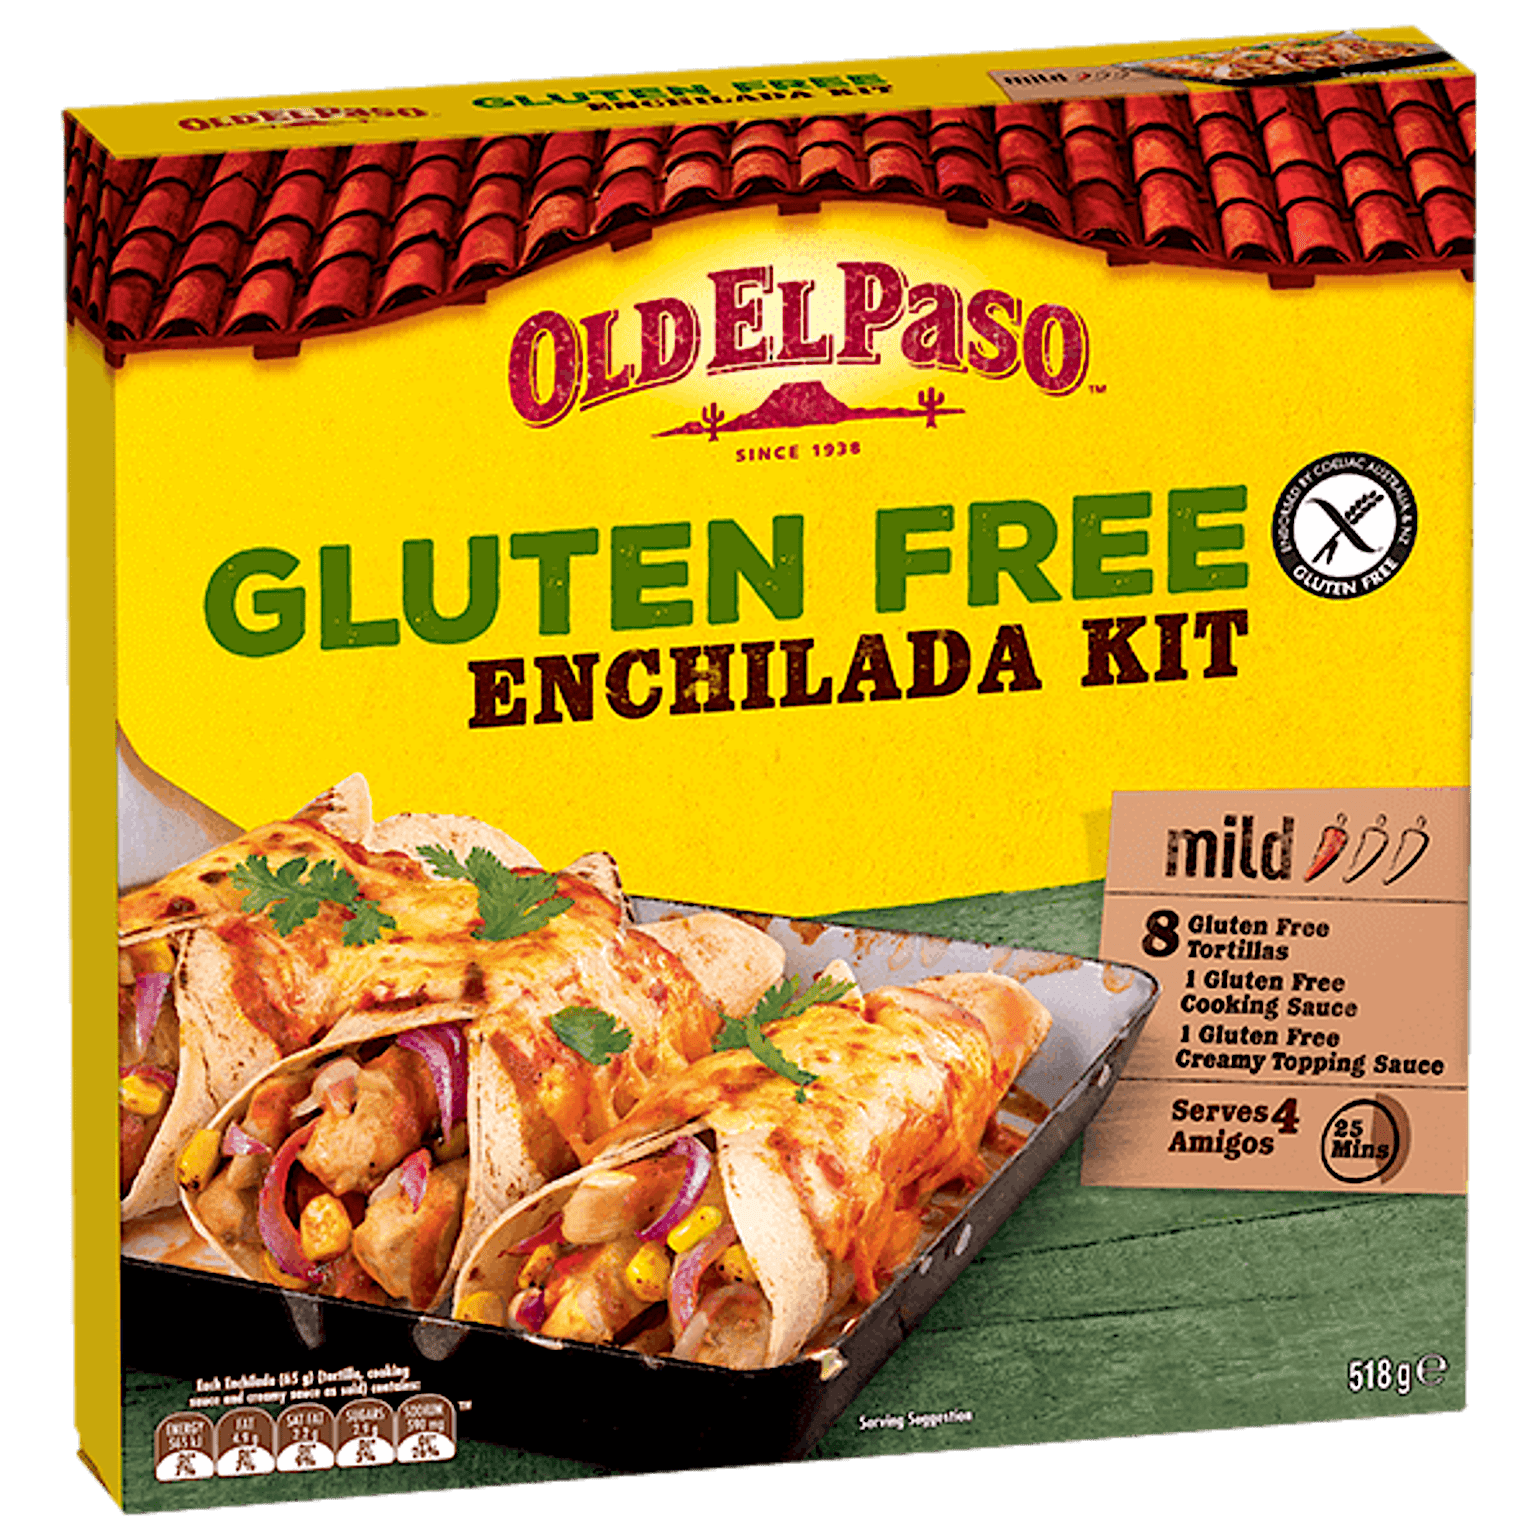 a pack of Old El Paso's gluten free mild enchilada kit containing tortillas, cooking sauce & creamy topping sauce (518g)